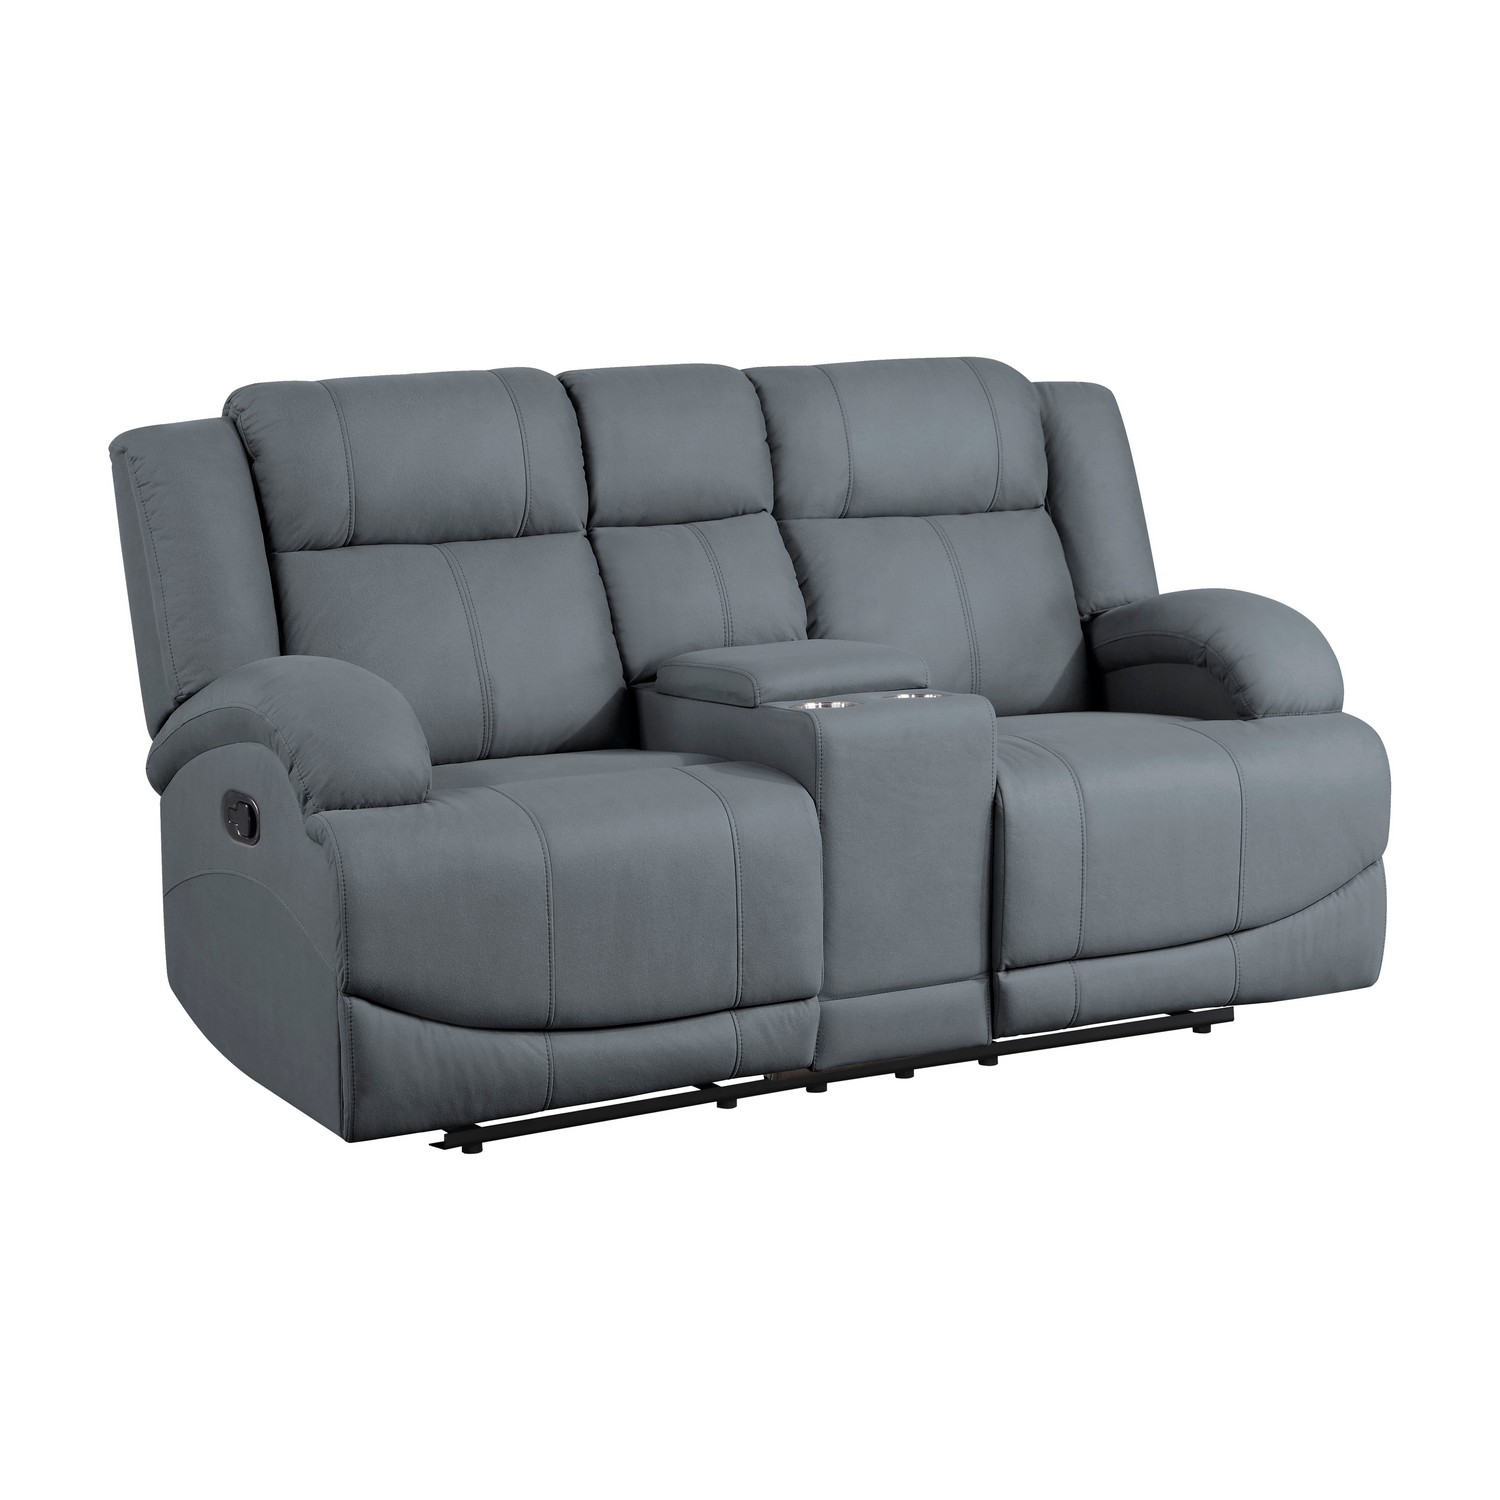 Homelegance Camryn Double Reclining Love Seat - Graphite blue